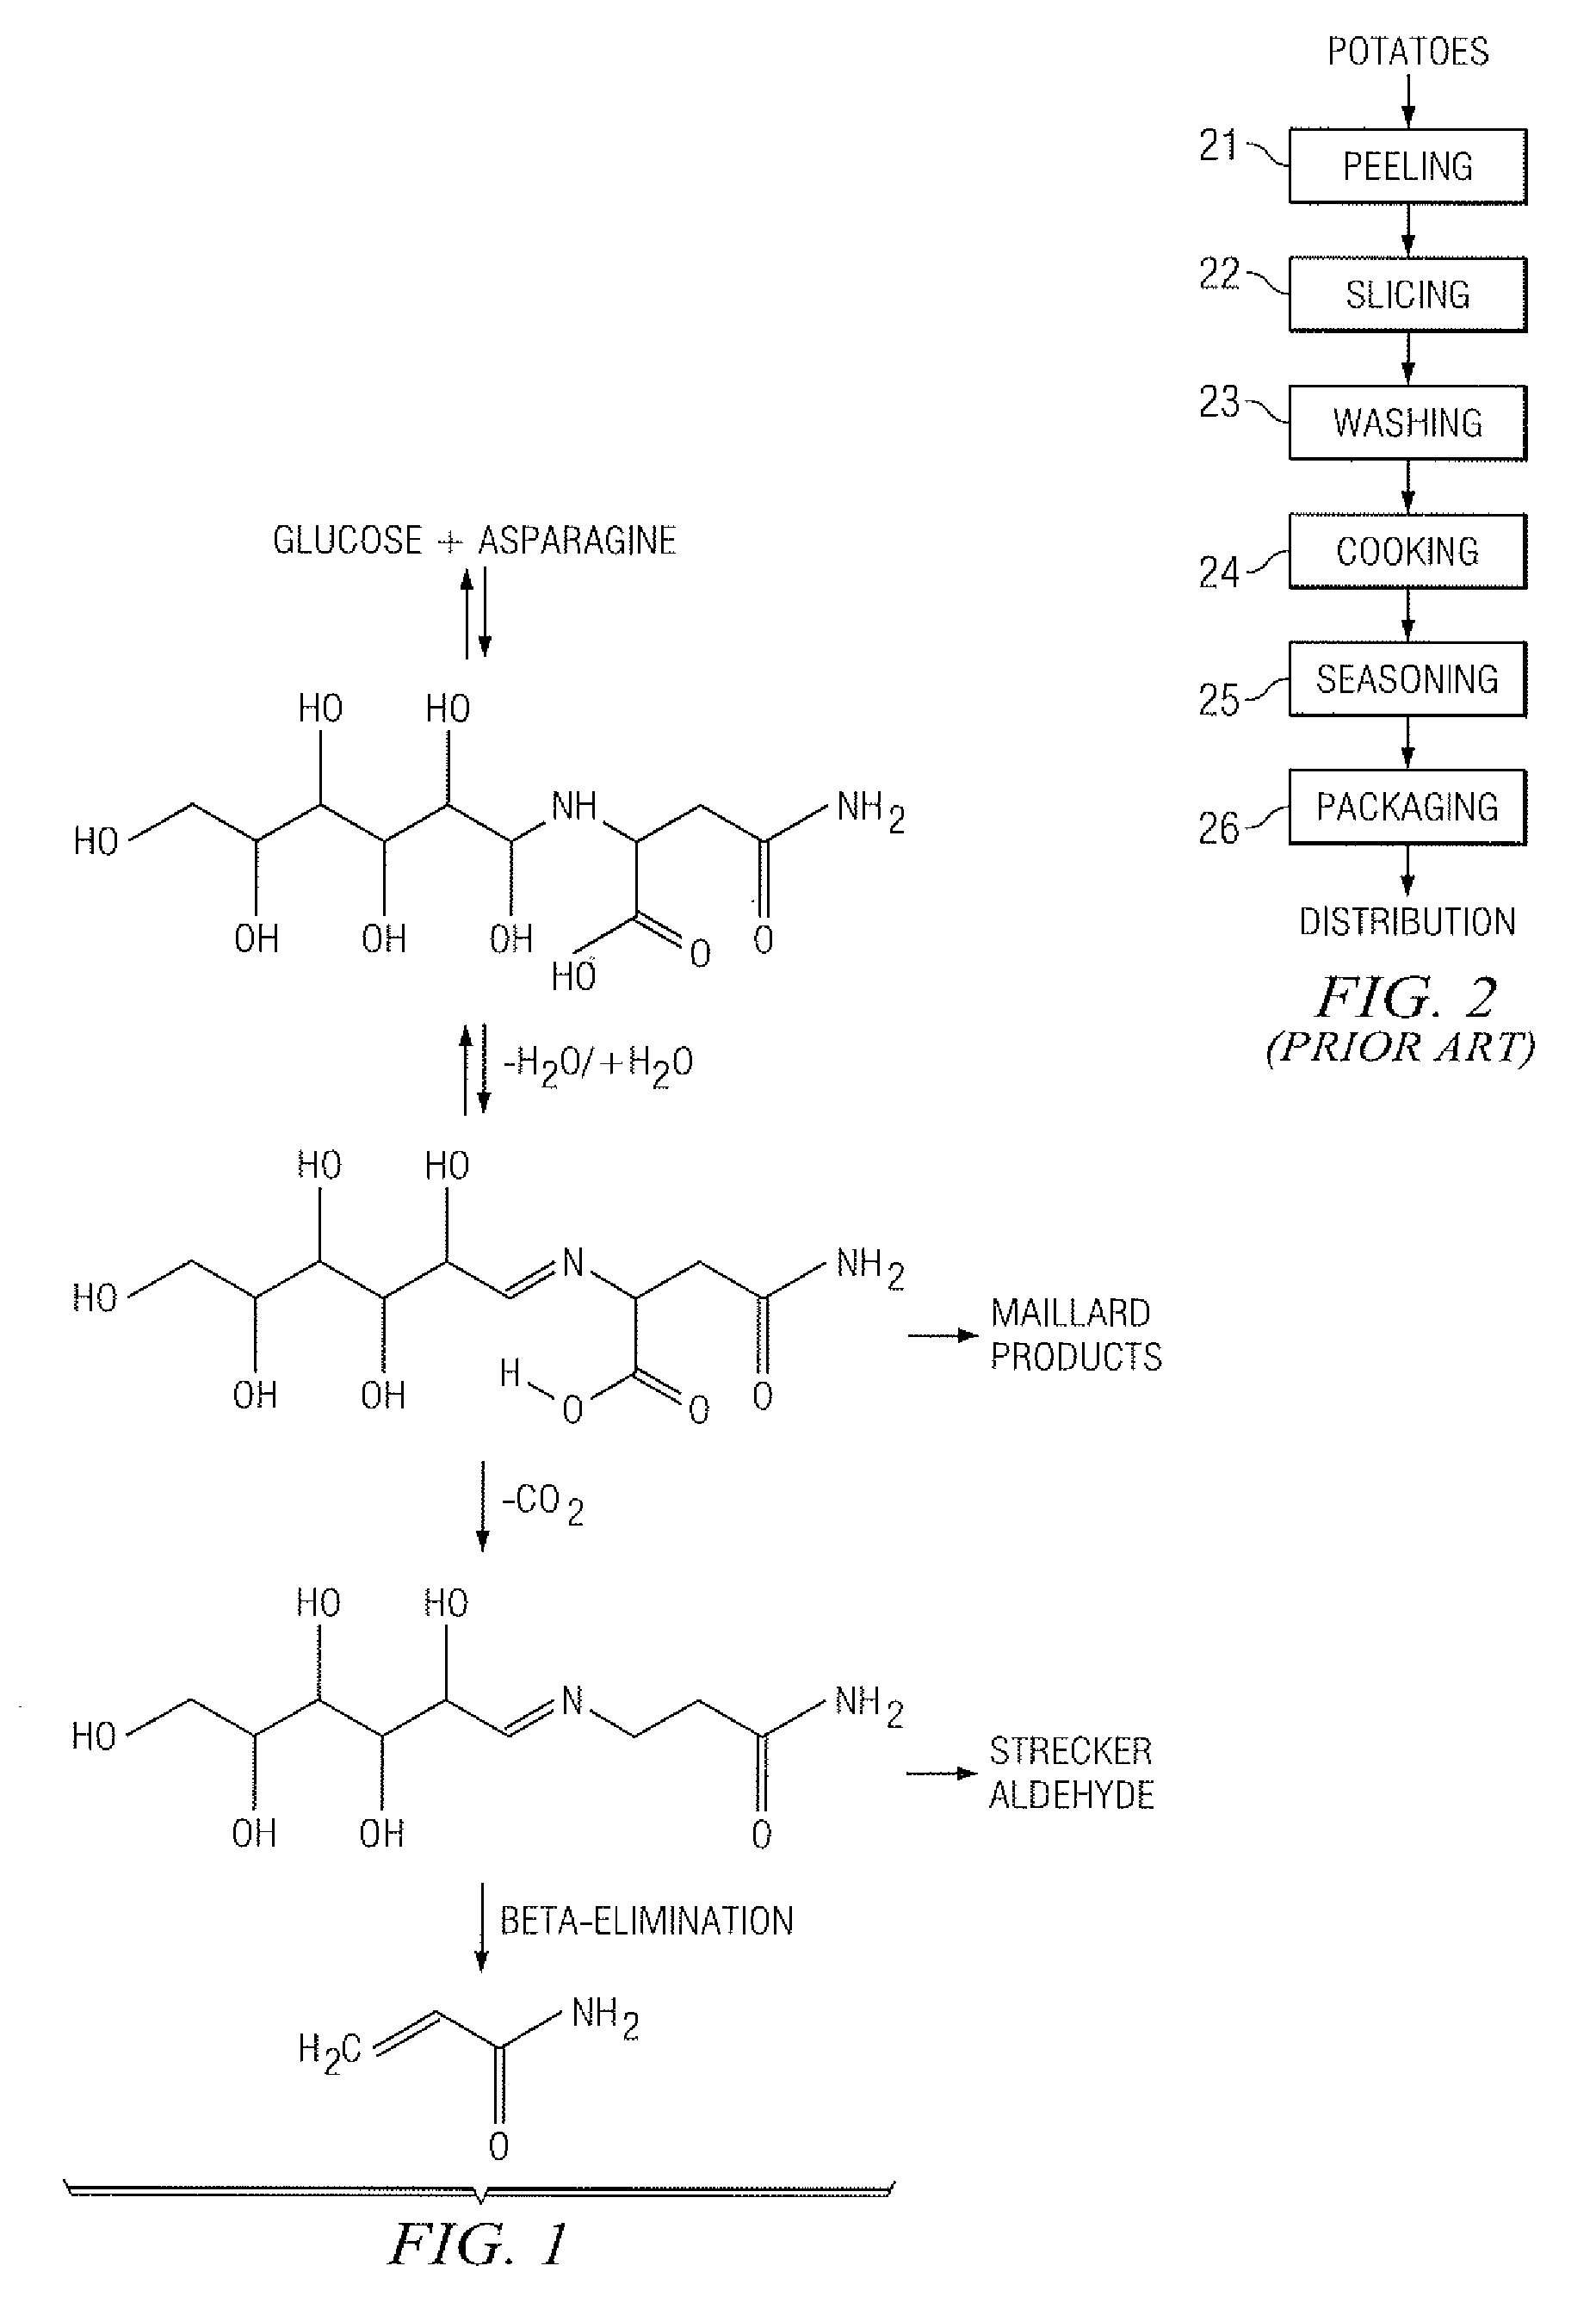 Method for Reducing Acrylamide Formation in Thermally Processed Foods